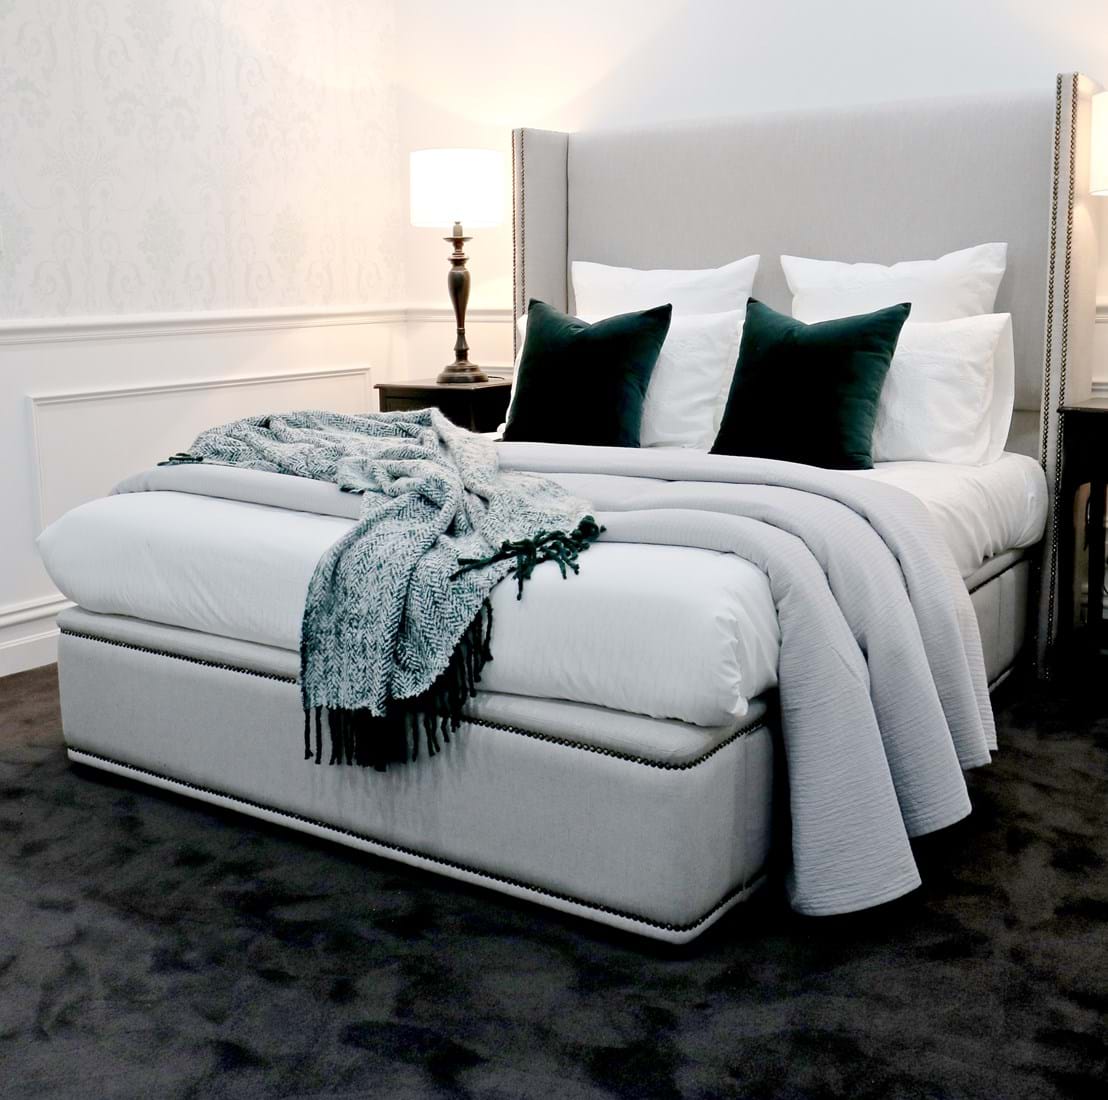 upholstered beds, upholstered bedheads,bedheads, headboards, buttoned